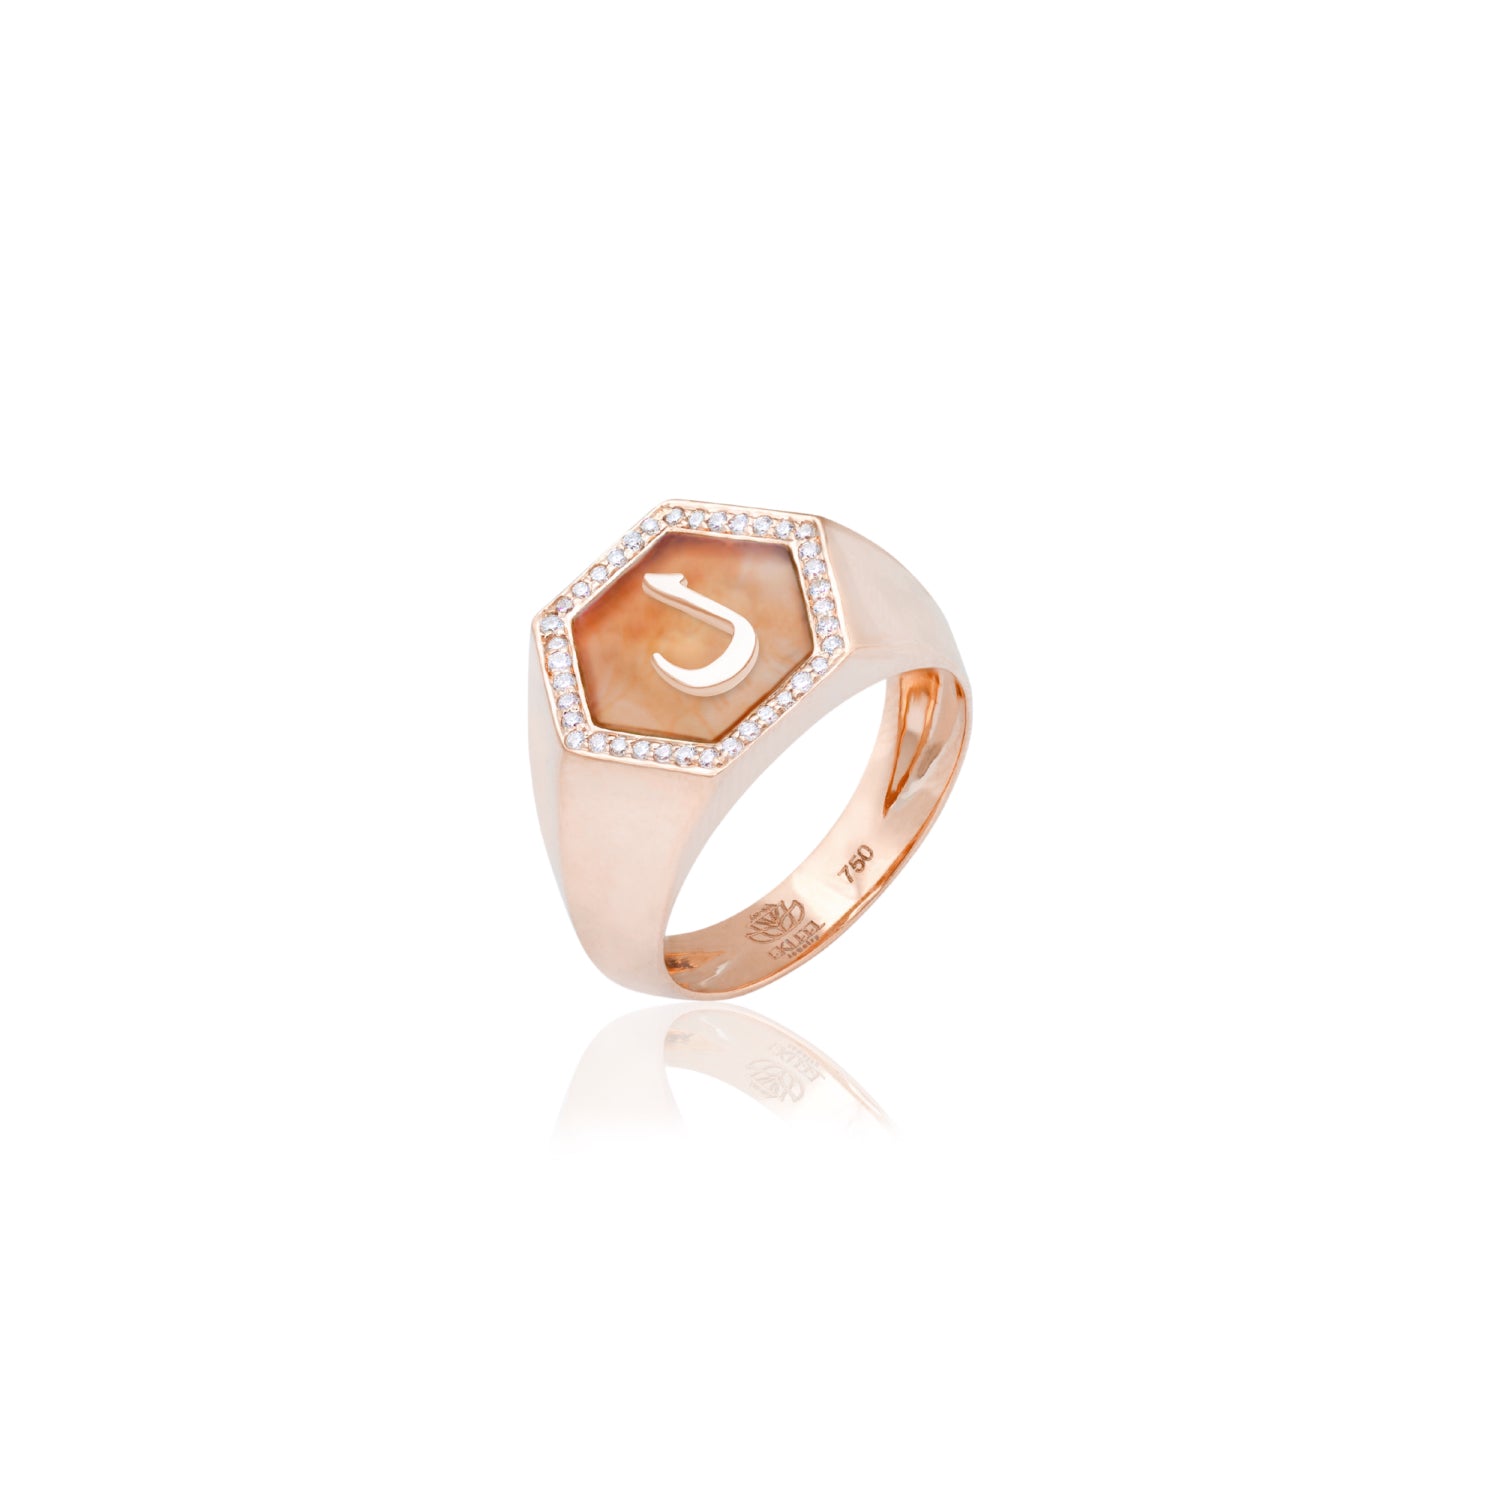 Qamoos 2.0 Letter ل Carnelian and Diamond Signet Ring in Rose Gold